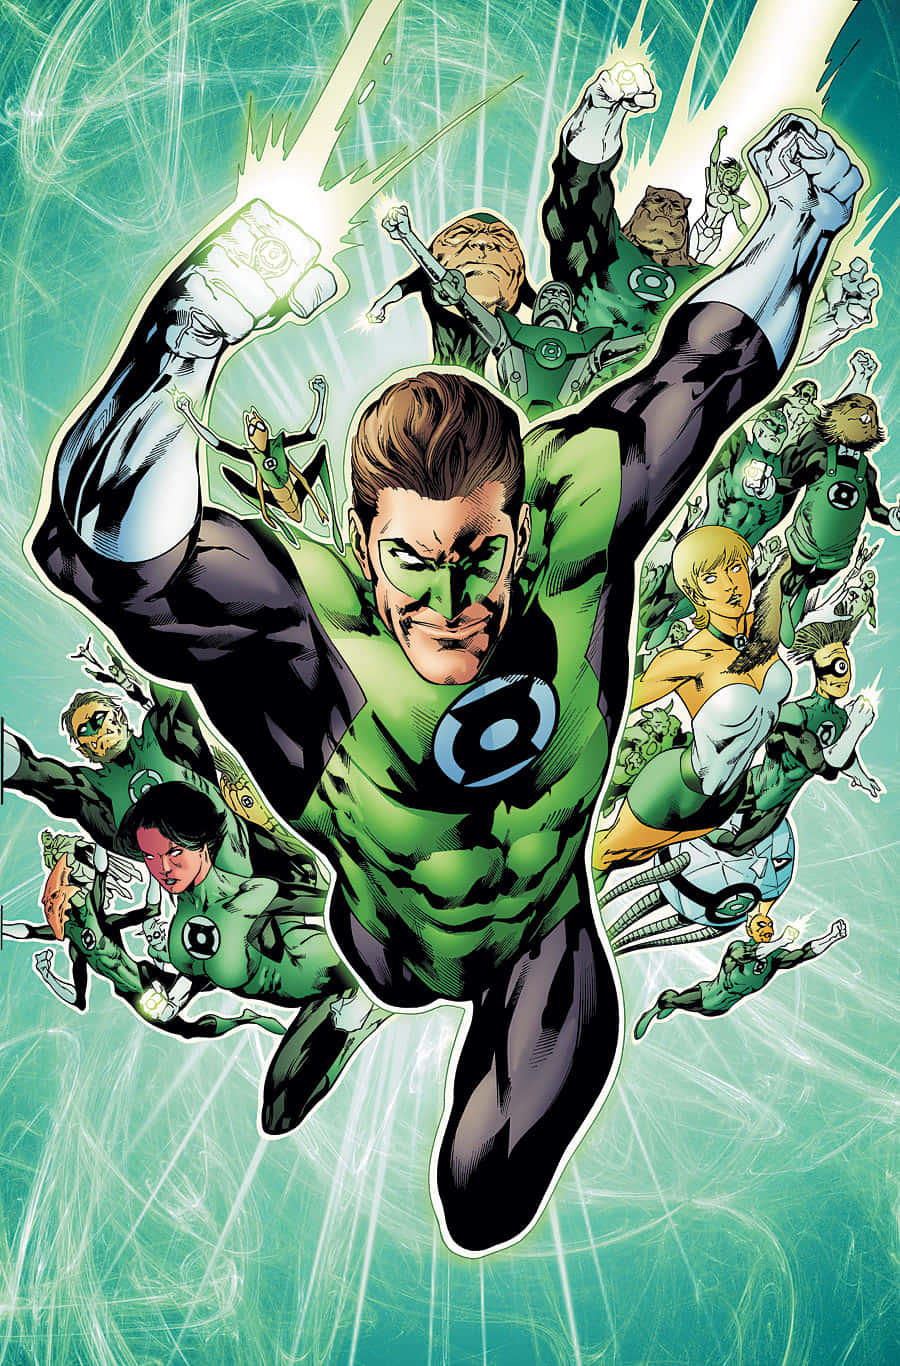 "Ferocious yet full of courage, the Green Lantern stands fearless in the night"